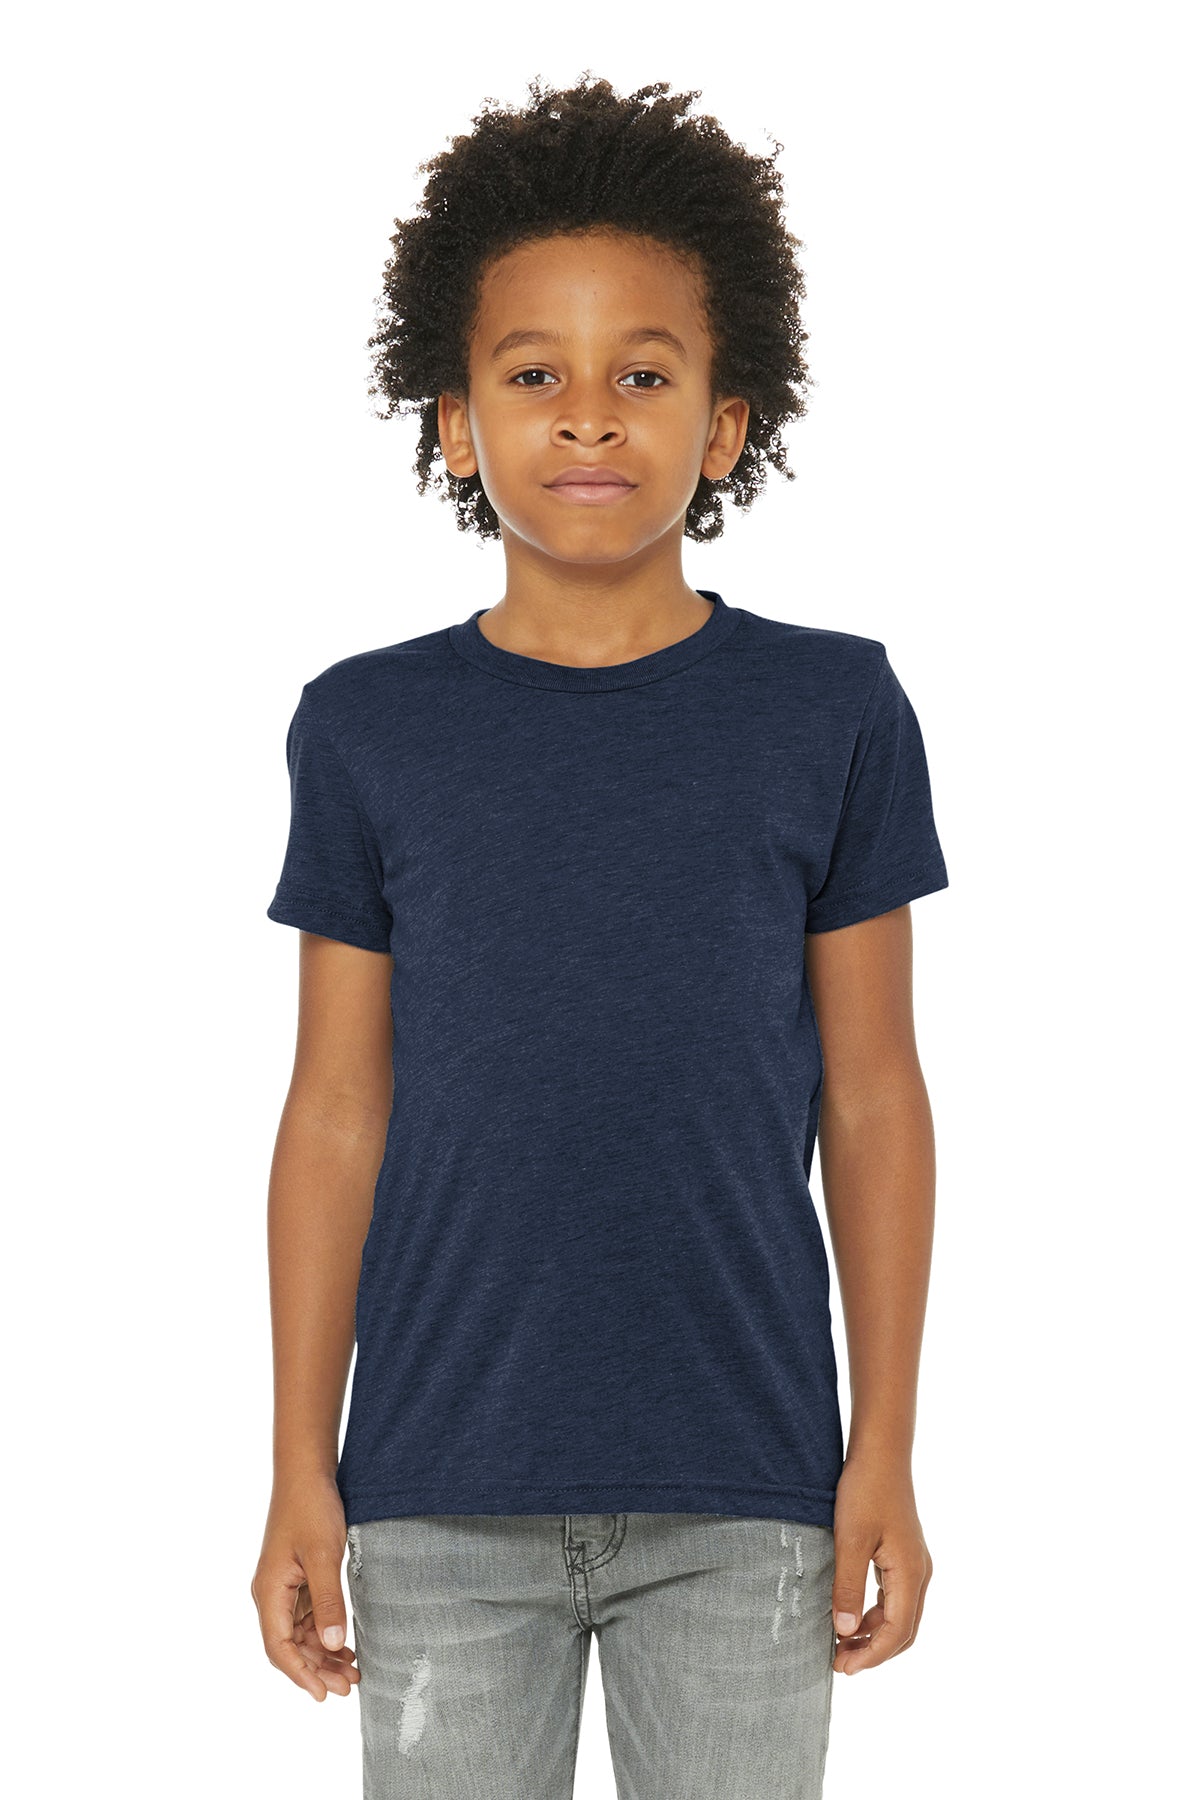 LL Loon Lake Words Only Youth Triblend Short Sleeve Tee